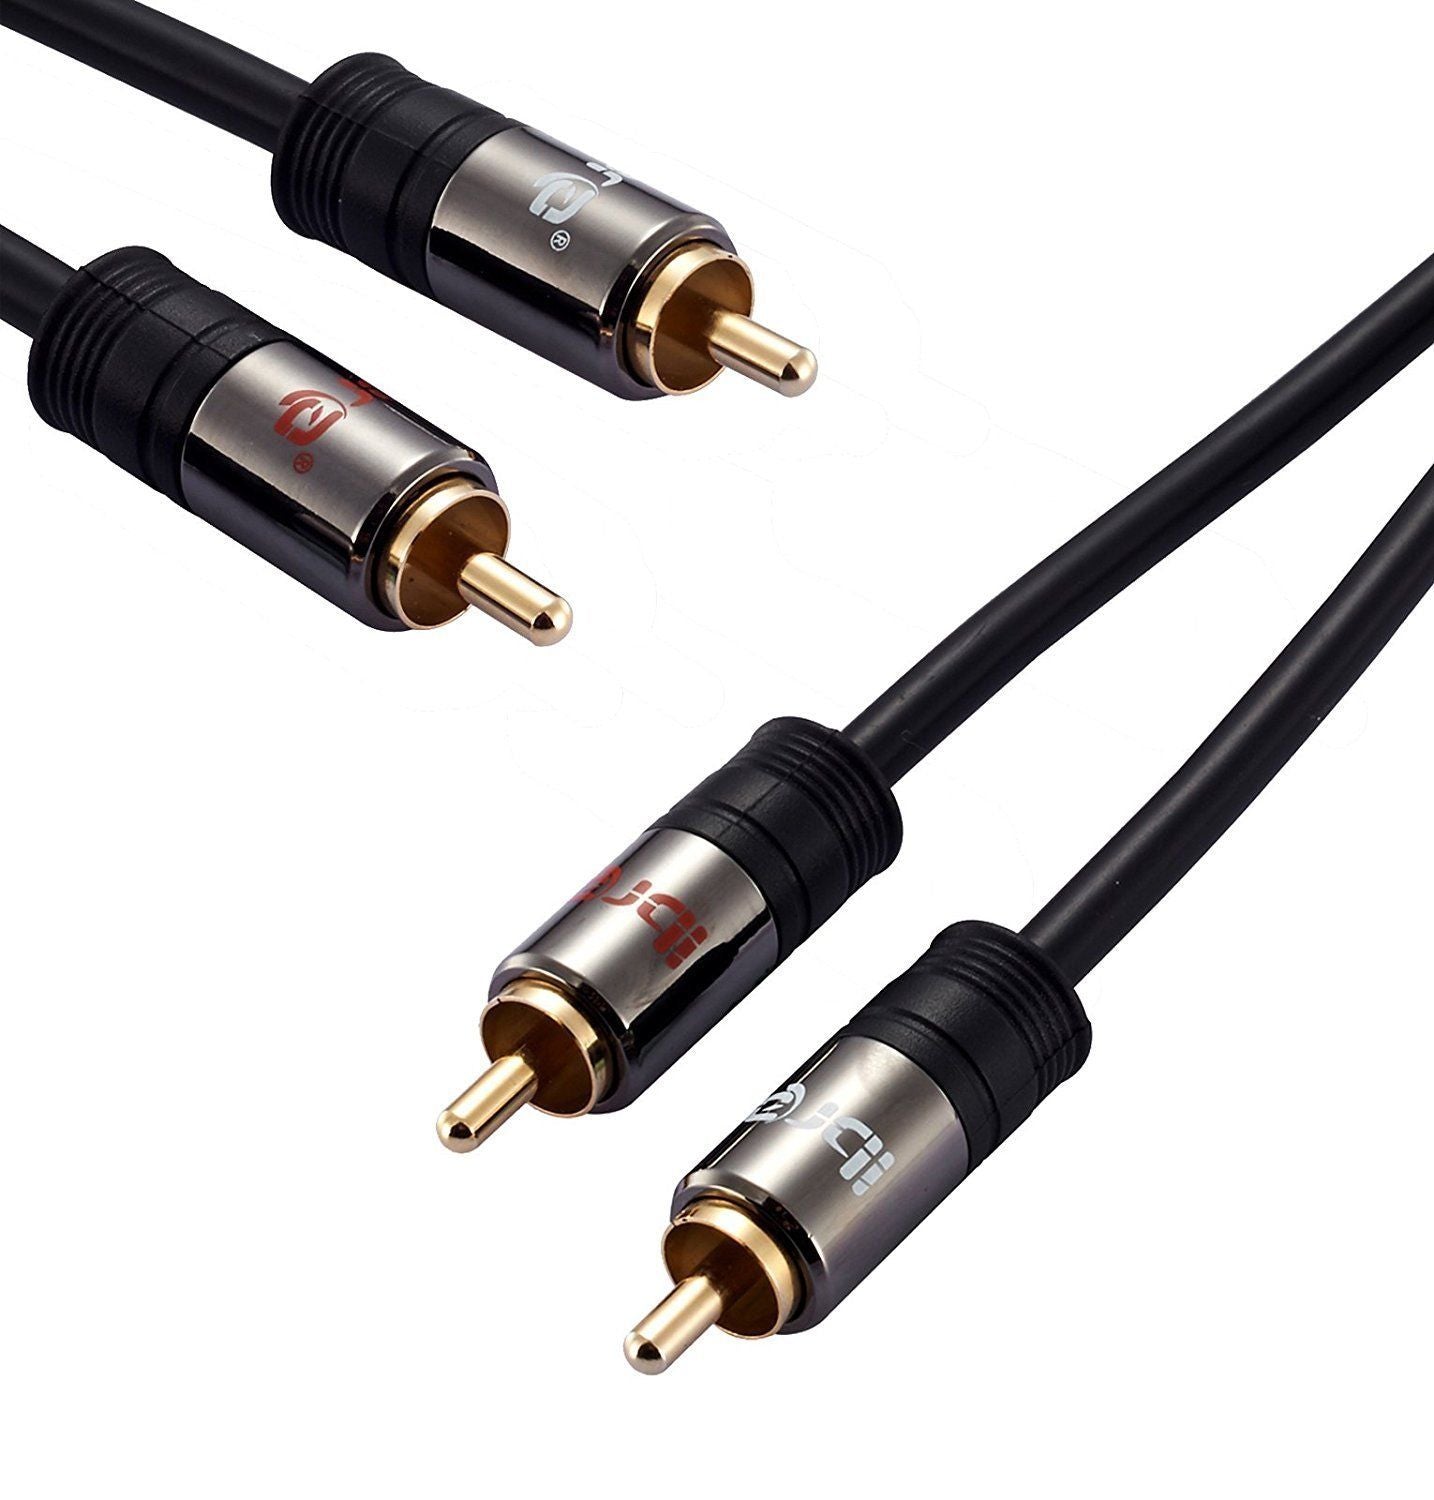 IBRA 7.5M 2RCA Male to 2RCA Male High Quality Home Theater Audio Cable -2RCA TO 2RCA Cable - Gun Metal Range